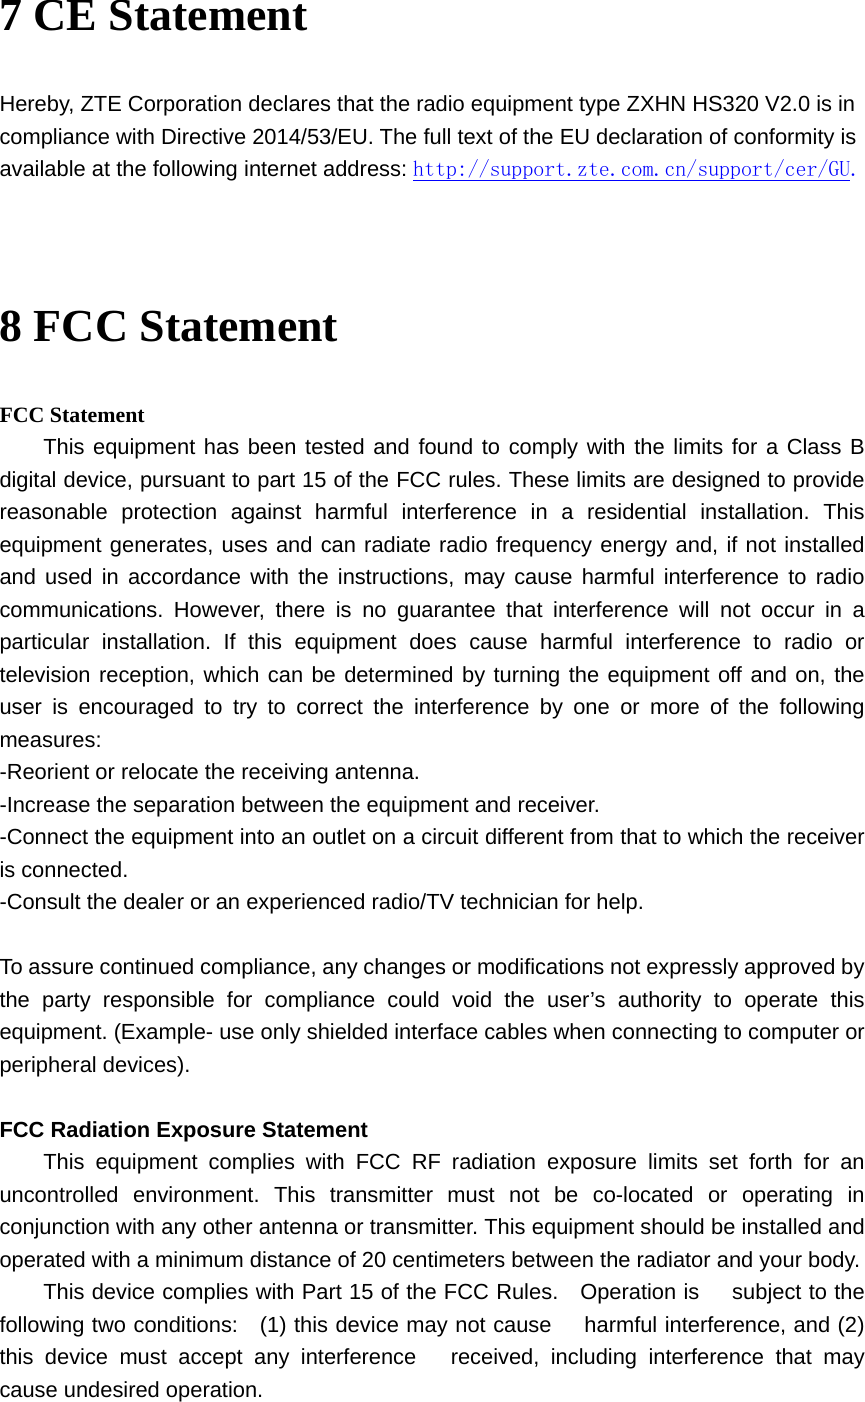 7 CE Statement Hereby, ZTE Corporation declares that the radio equipment type ZXHN HS320 V2.0 is in compliance with Directive 2014/53/EU. The full text of the EU declaration of conformity is available at the following internet address: http://support.zte.com.cn/support/cer/GU.   8 FCC Statement FCC Statement This equipment has been tested and found to comply with the limits for a Class B digital device, pursuant to part 15 of the FCC rules. These limits are designed to provide reasonable protection against harmful interference in a residential installation. This equipment generates, uses and can radiate radio frequency energy and, if not installed and used in accordance with the instructions, may cause harmful interference to radio communications. However, there is no guarantee that interference will not occur in a particular installation. If this equipment does cause harmful interference to radio or television reception, which can be determined by turning the equipment off and on, the user is encouraged to try to correct the interference by one or more of the following measures: -Reorient or relocate the receiving antenna. -Increase the separation between the equipment and receiver. -Connect the equipment into an outlet on a circuit different from that to which the receiver is connected. -Consult the dealer or an experienced radio/TV technician for help.  To assure continued compliance, any changes or modifications not expressly approved by the party responsible for compliance could void the user’s authority to operate this equipment. (Example- use only shielded interface cables when connecting to computer or peripheral devices).  FCC Radiation Exposure Statement This equipment complies with FCC RF radiation exposure limits set forth for an uncontrolled environment. This transmitter must not be co-located or operating in conjunction with any other antenna or transmitter. This equipment should be installed and operated with a minimum distance of 20 centimeters between the radiator and your body.  This device complies with Part 15 of the FCC Rules.  Operation is   subject to the following two conditions:    (1) this device may not cause   harmful interference, and (2) this device must accept any interference   received, including interference that may cause undesired operation. 